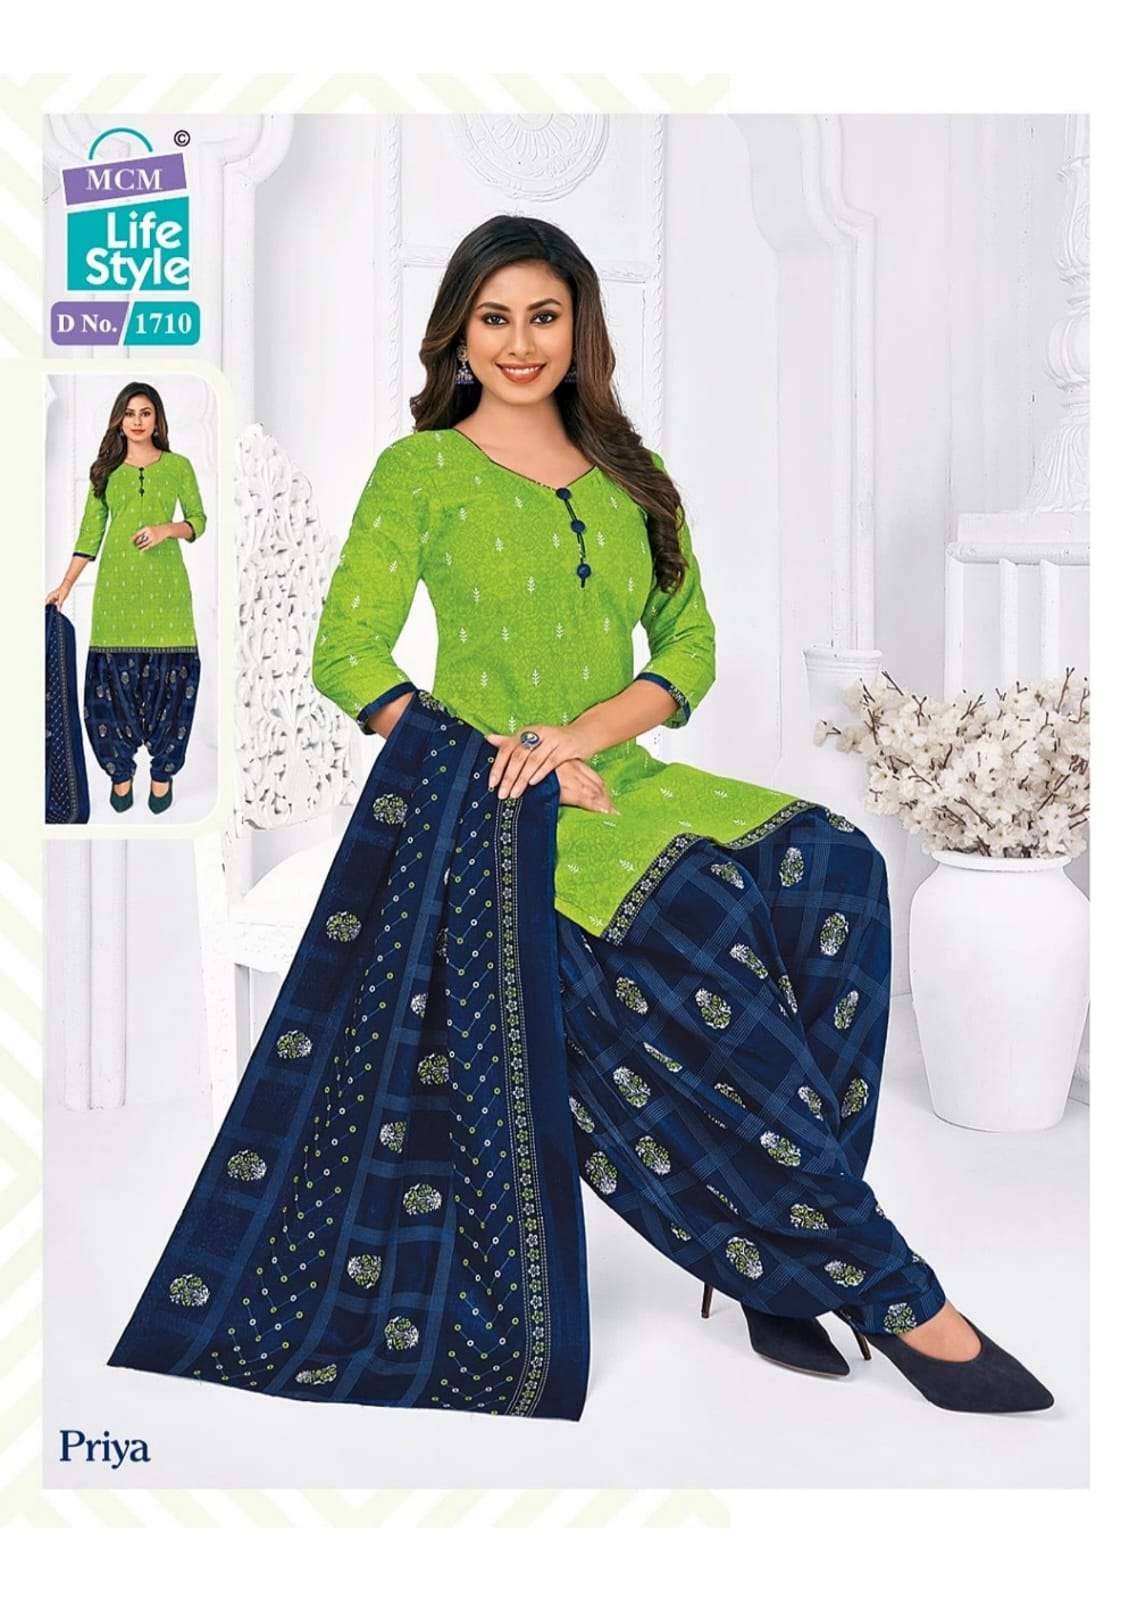 MCM Lifestyle  Present Priya Vol 17 With Pocket Special Dress Material On Wholesale